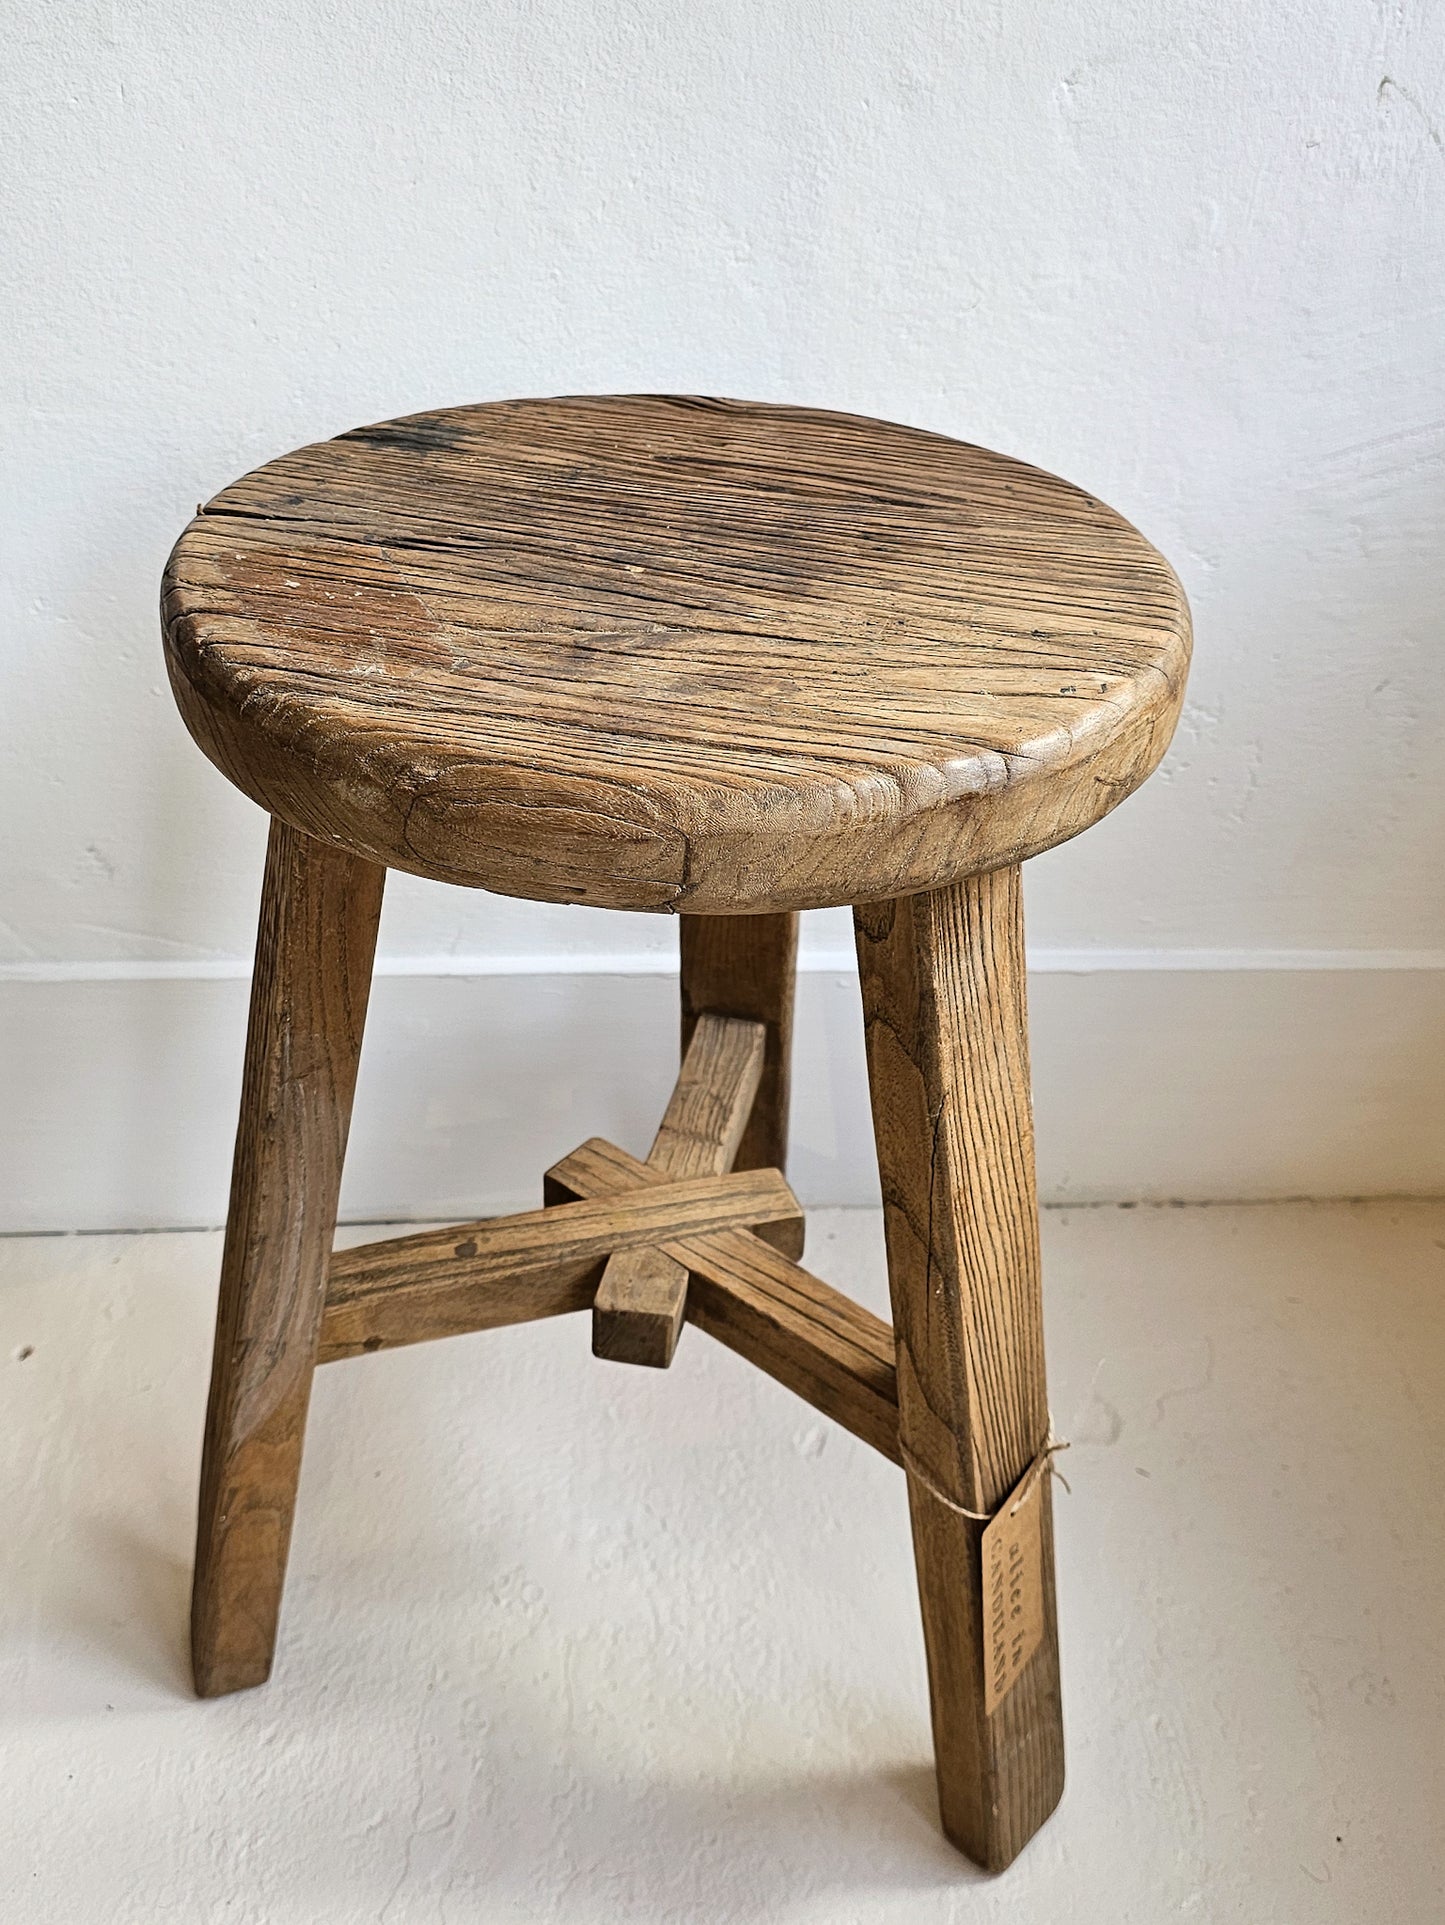 Rustic Reclaimed Stool | Round